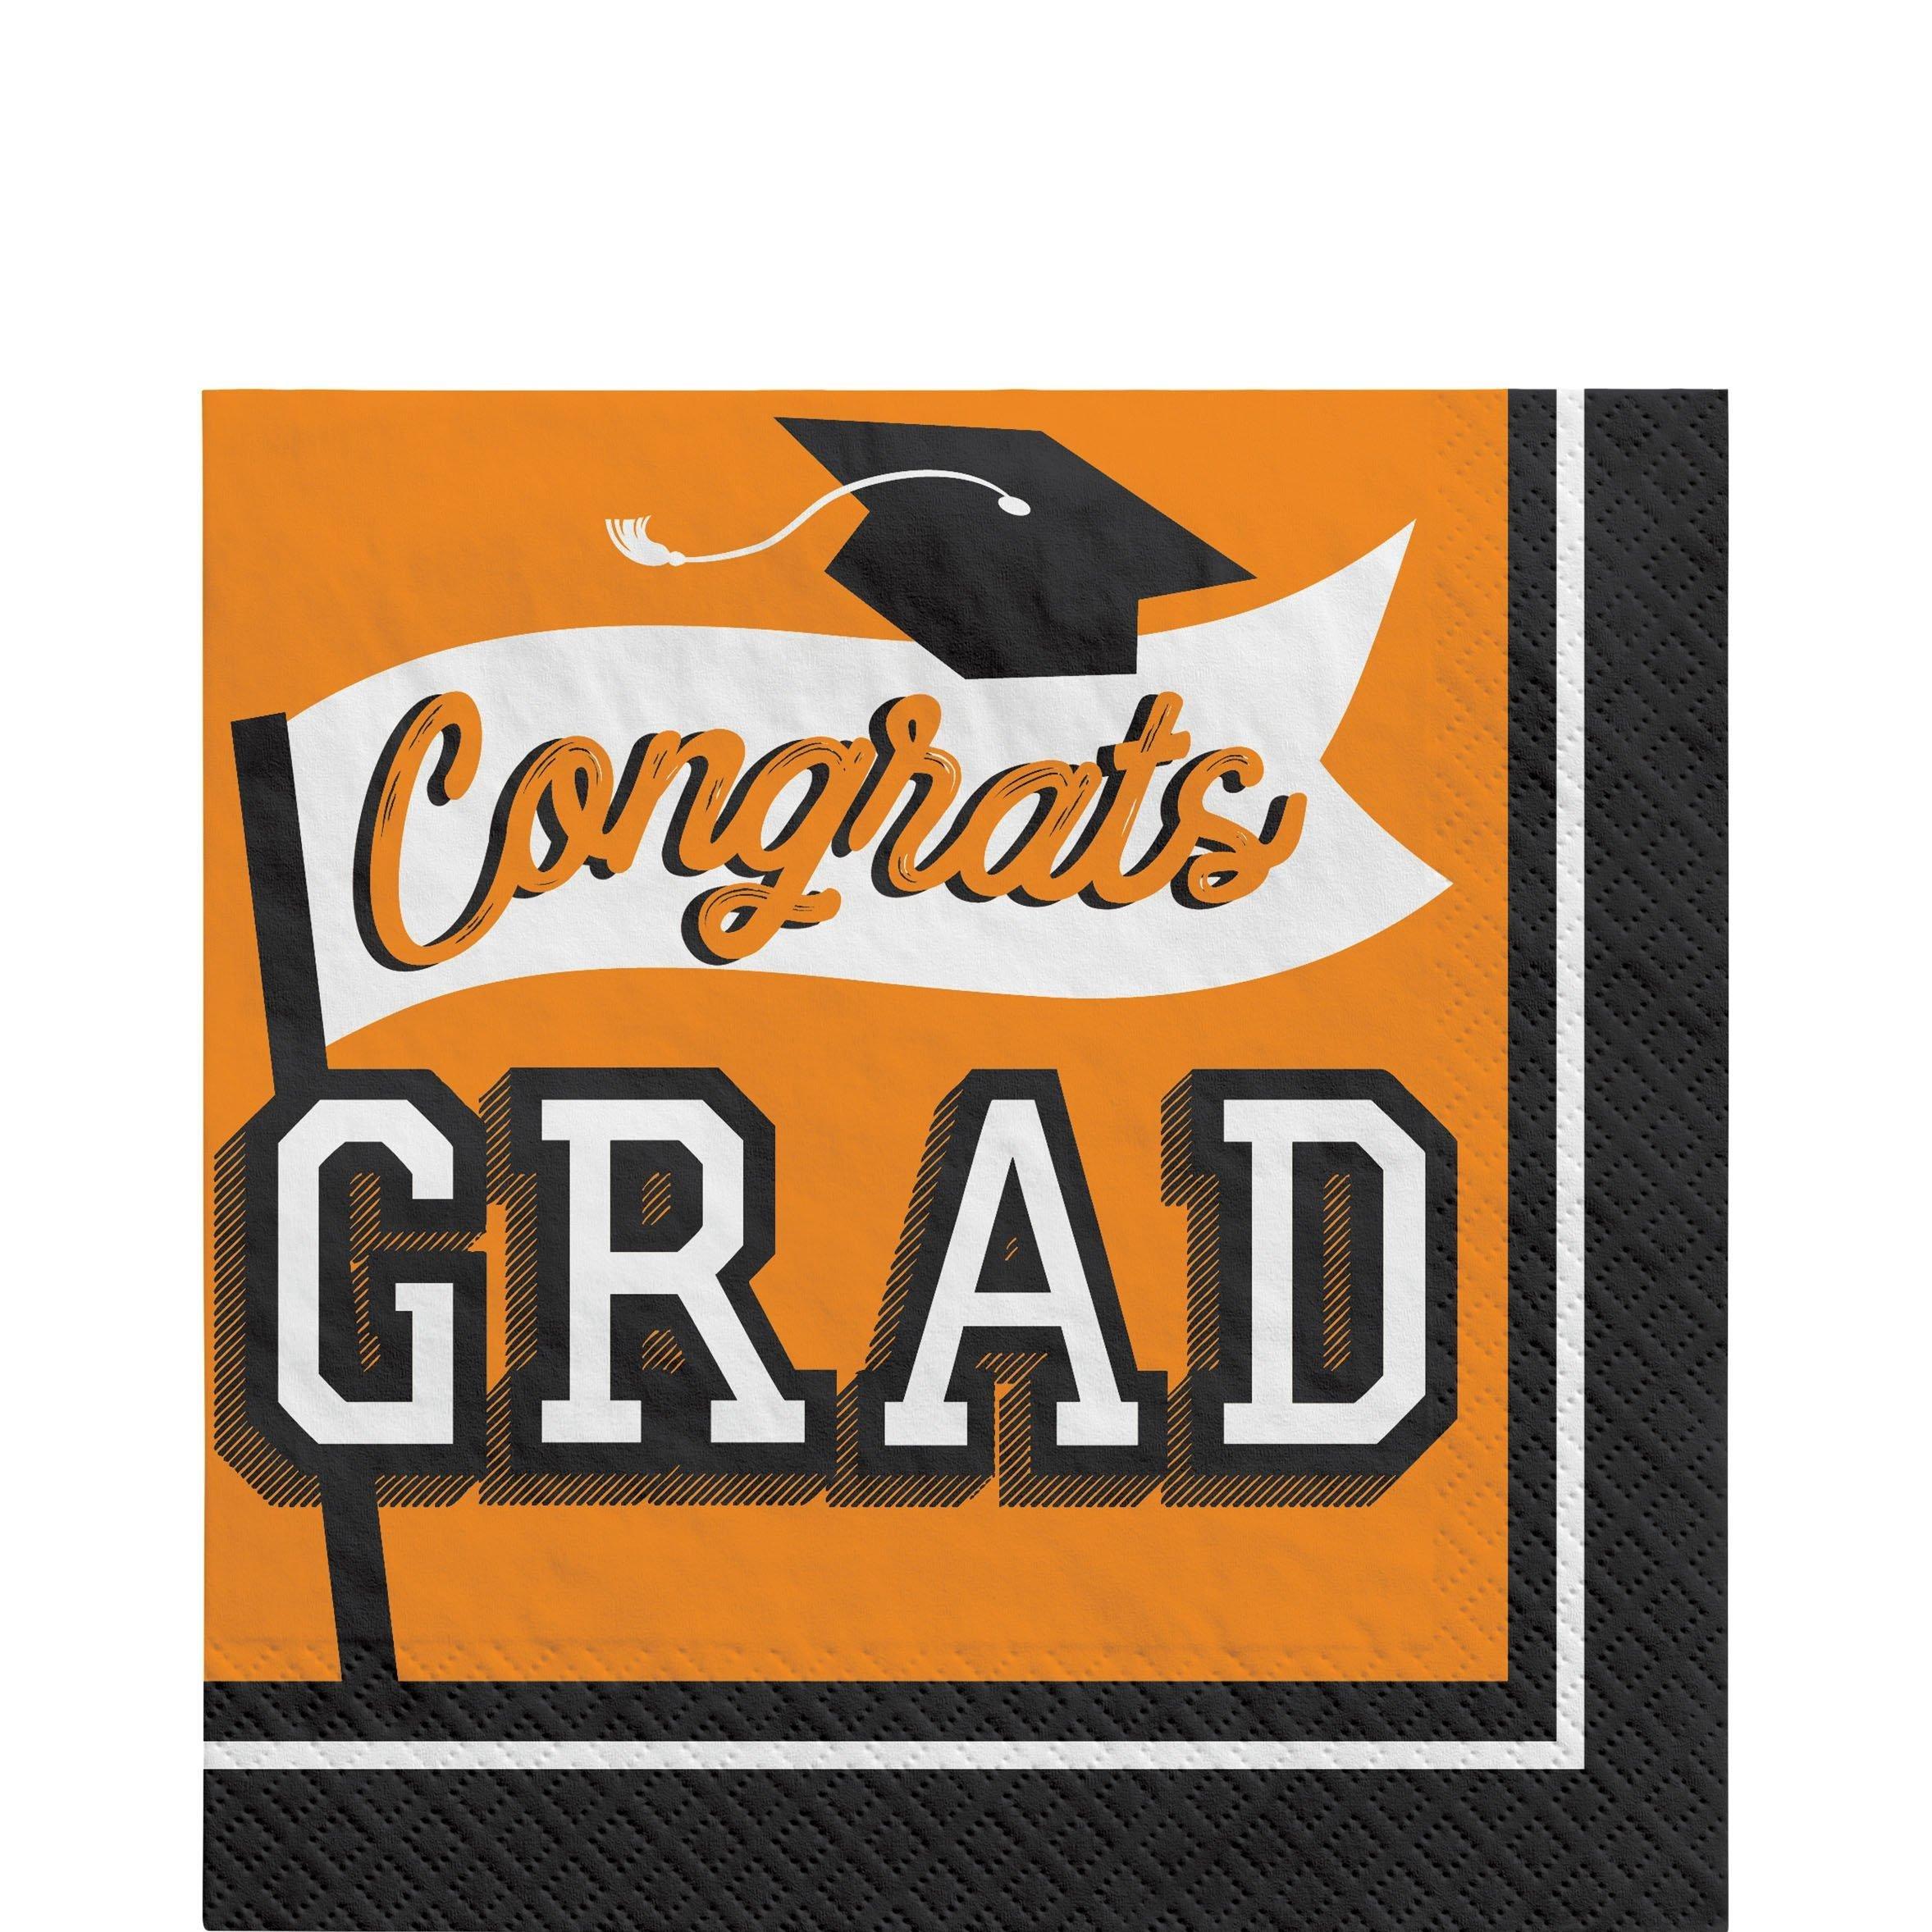 Graduation Party Supplies Kit for 20 with Decorations, Banners, Balloons, Plates, Napkins - Orange Congrats Grad